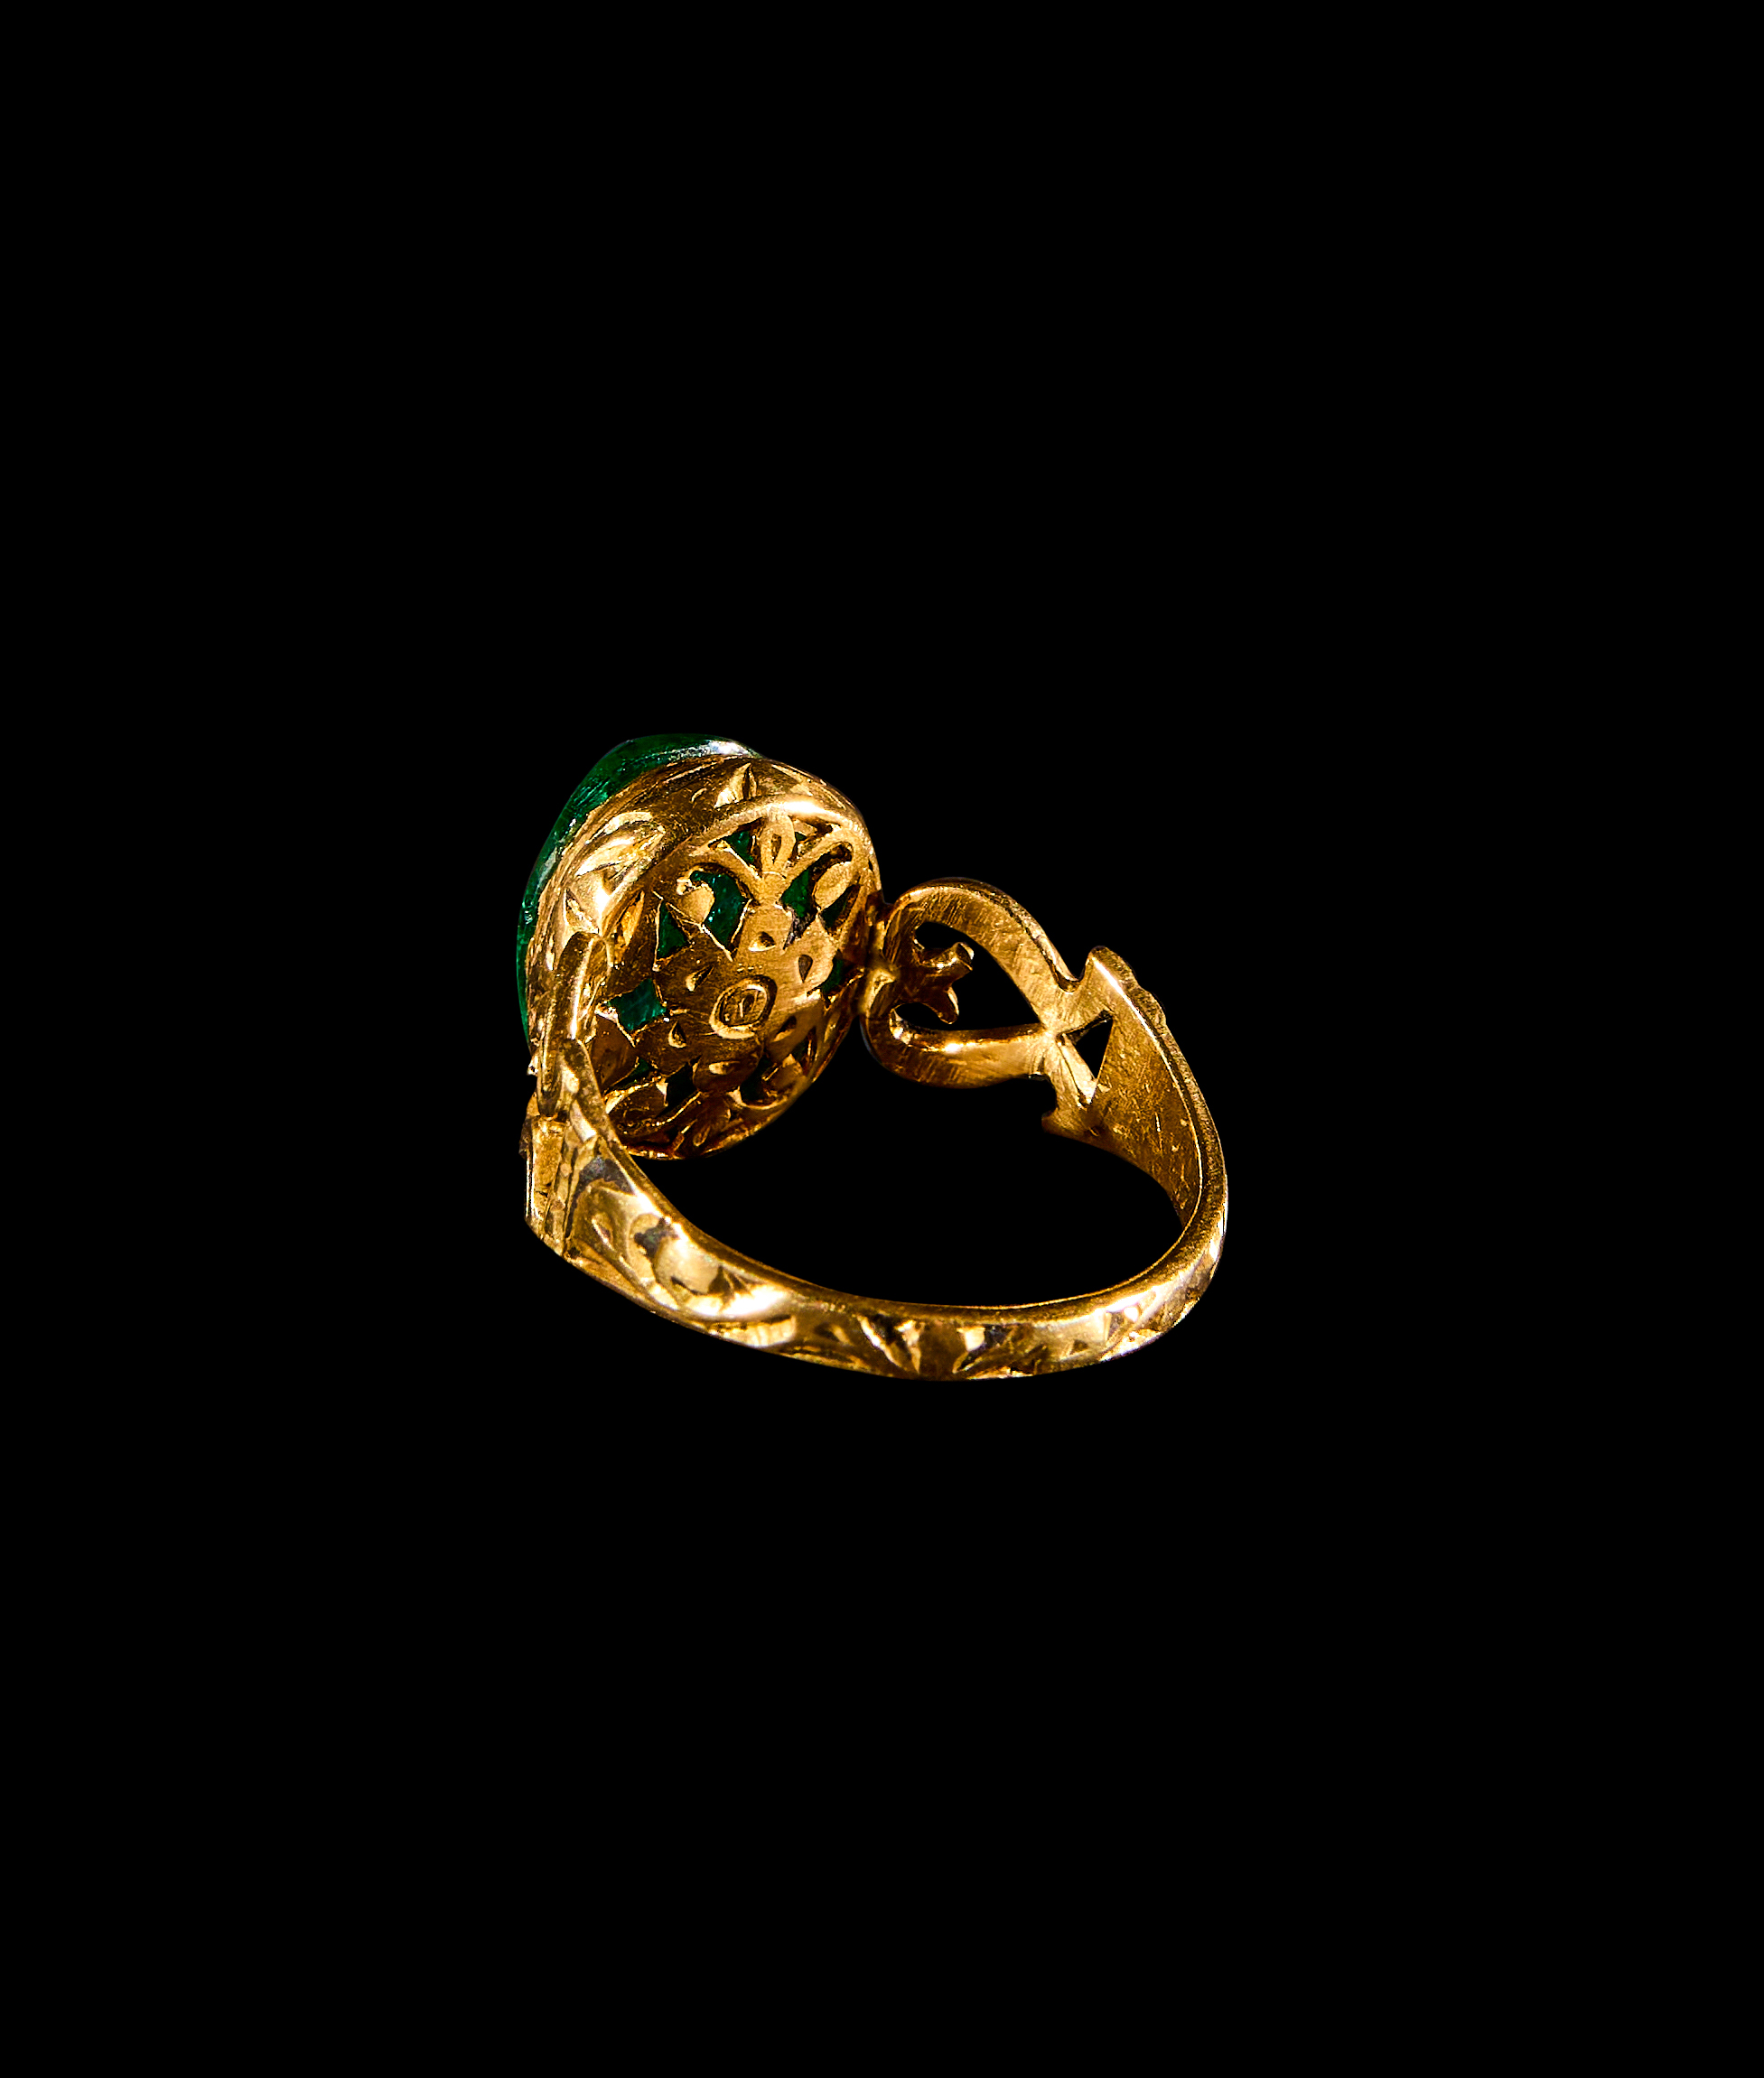 AN ENGRAVED MUGHAL EMERALD & GOLD RING, MUGHAL 19TH CENTURY, INDIA - Image 3 of 3